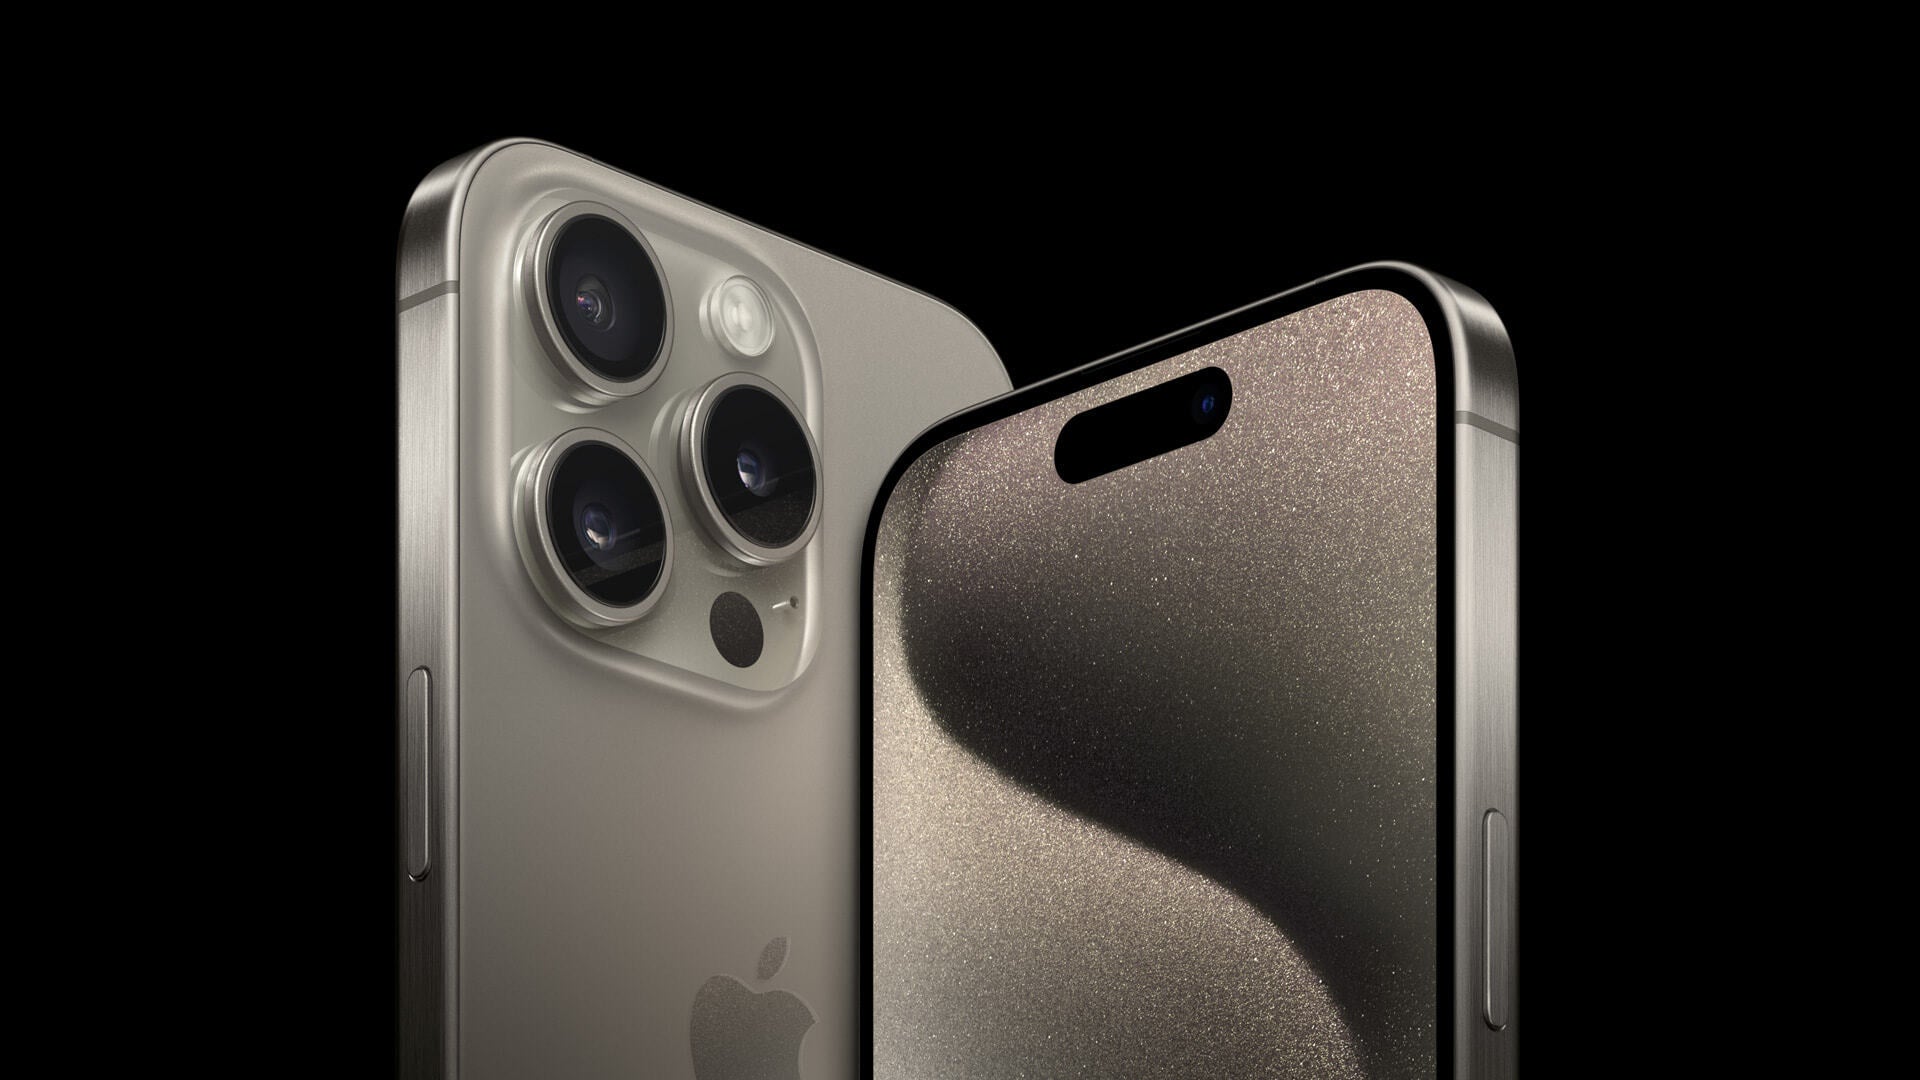 iPhone 15 camera: all upgrades and new features - PhoneArena